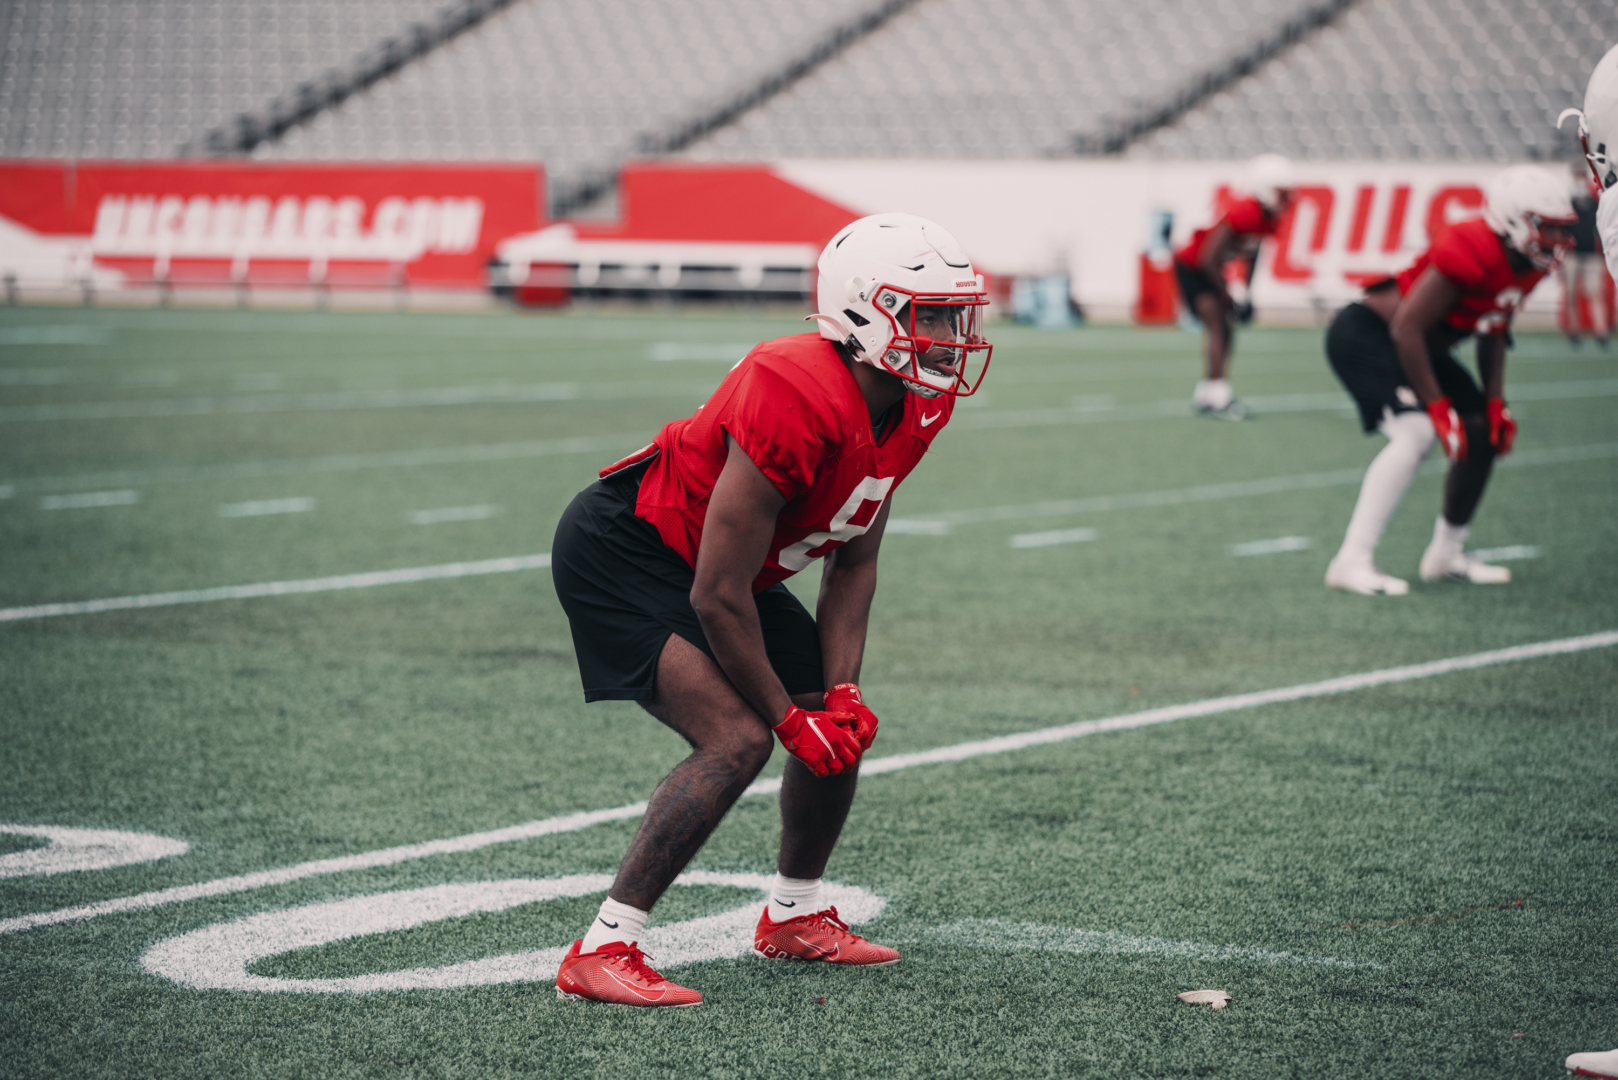 The UH football team's defensive pressure has been the biggest highlight of the spring, according to head coach Dana Holgorsen. | Courtesy of UH athletics